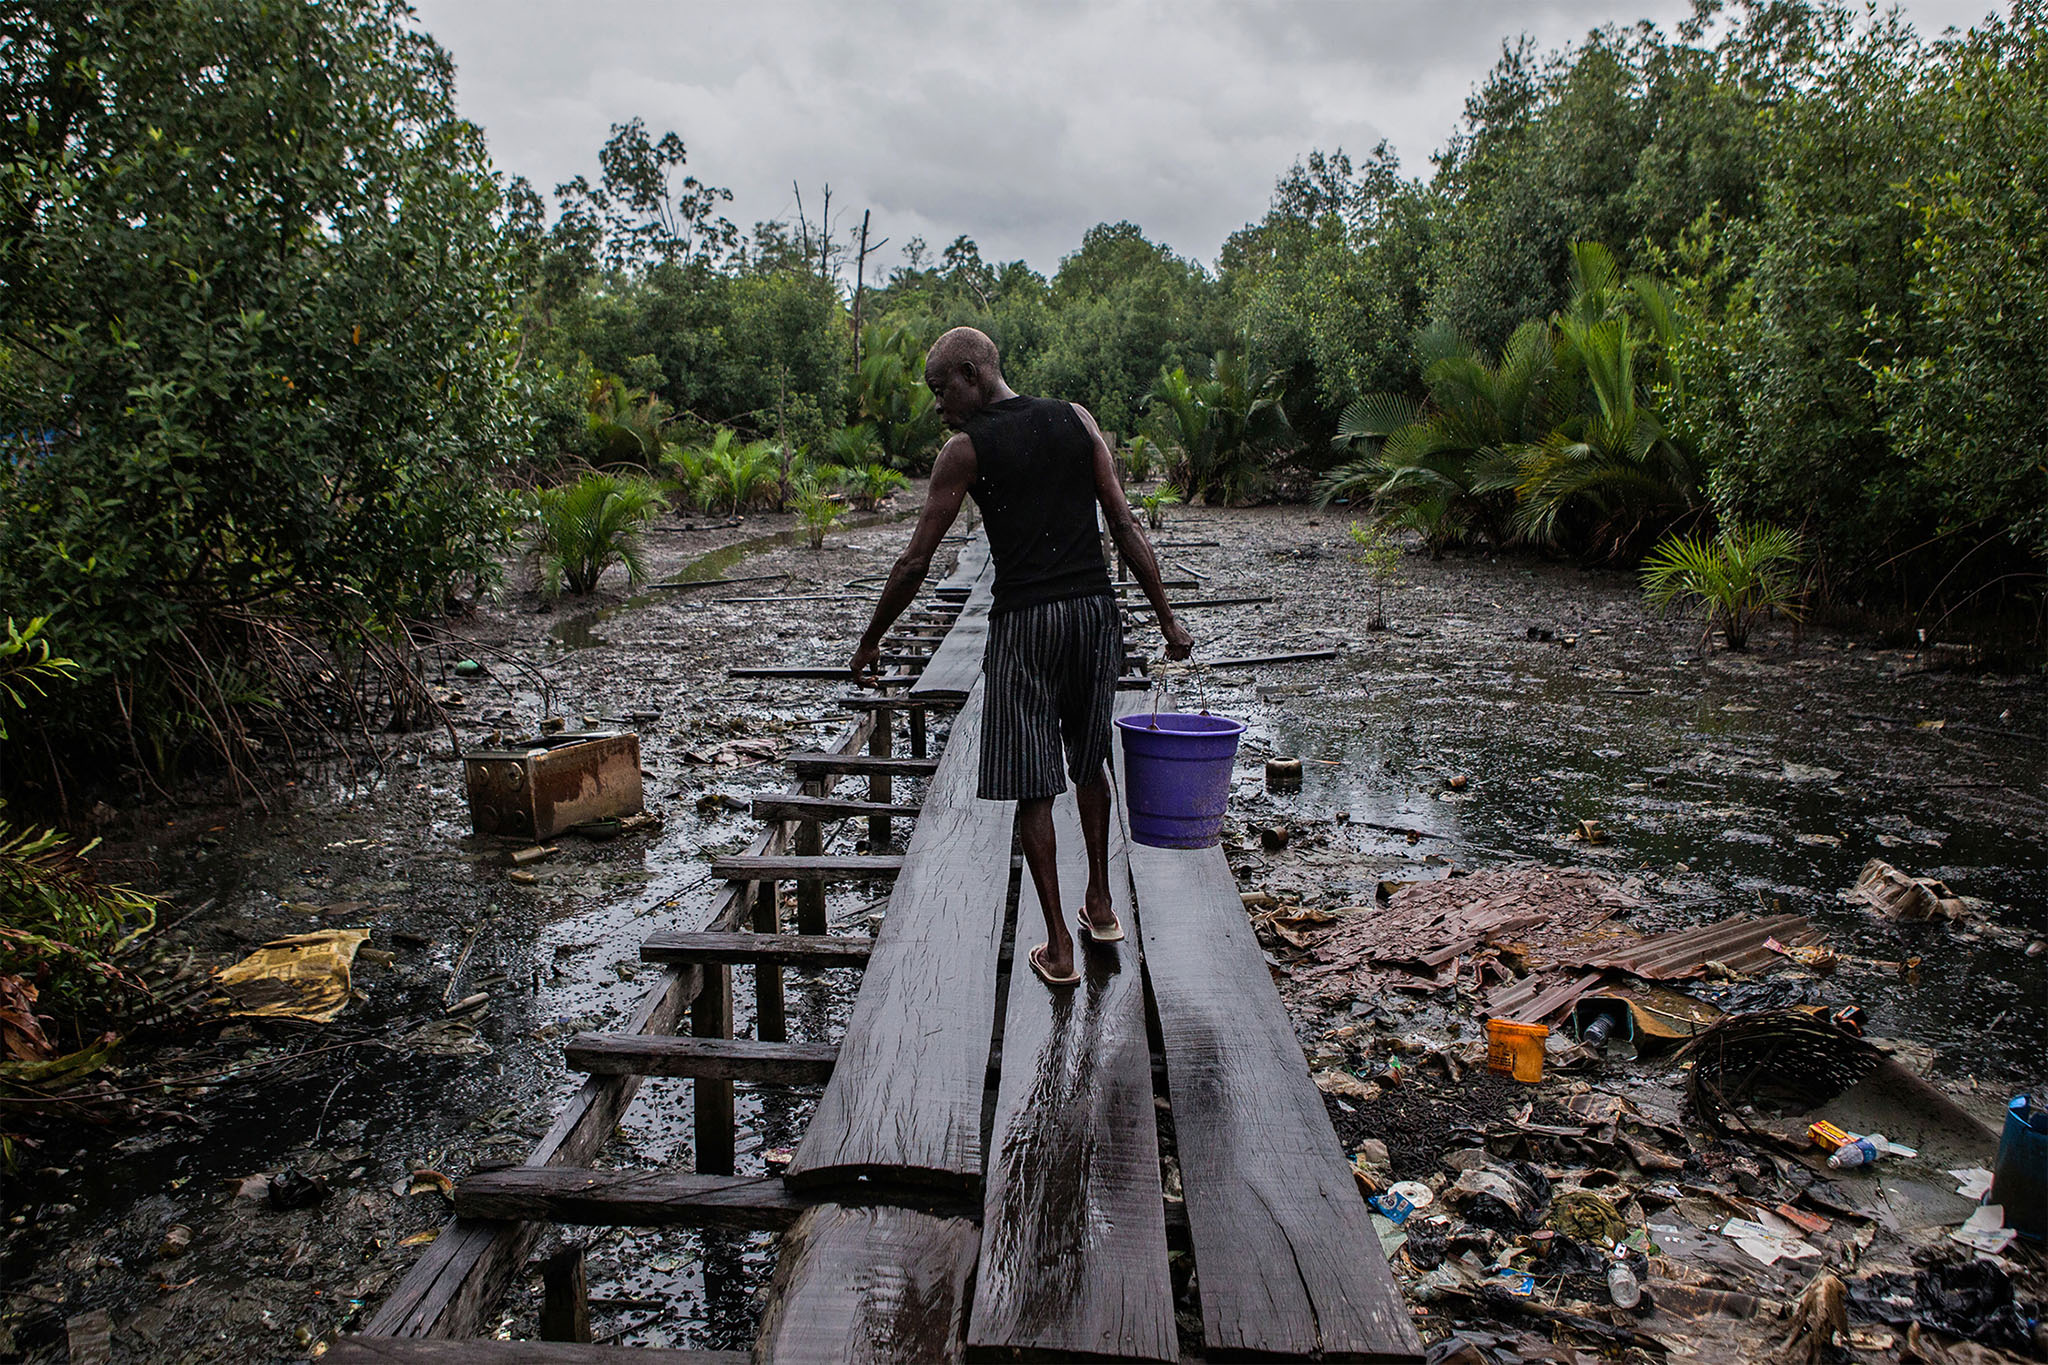 A man walks along the former jetty of Ugborodo, Nigeria, on June 13, 2016. The water in the area is heavily polluted by oil. (Photo by Jane Hahn/New York Times)